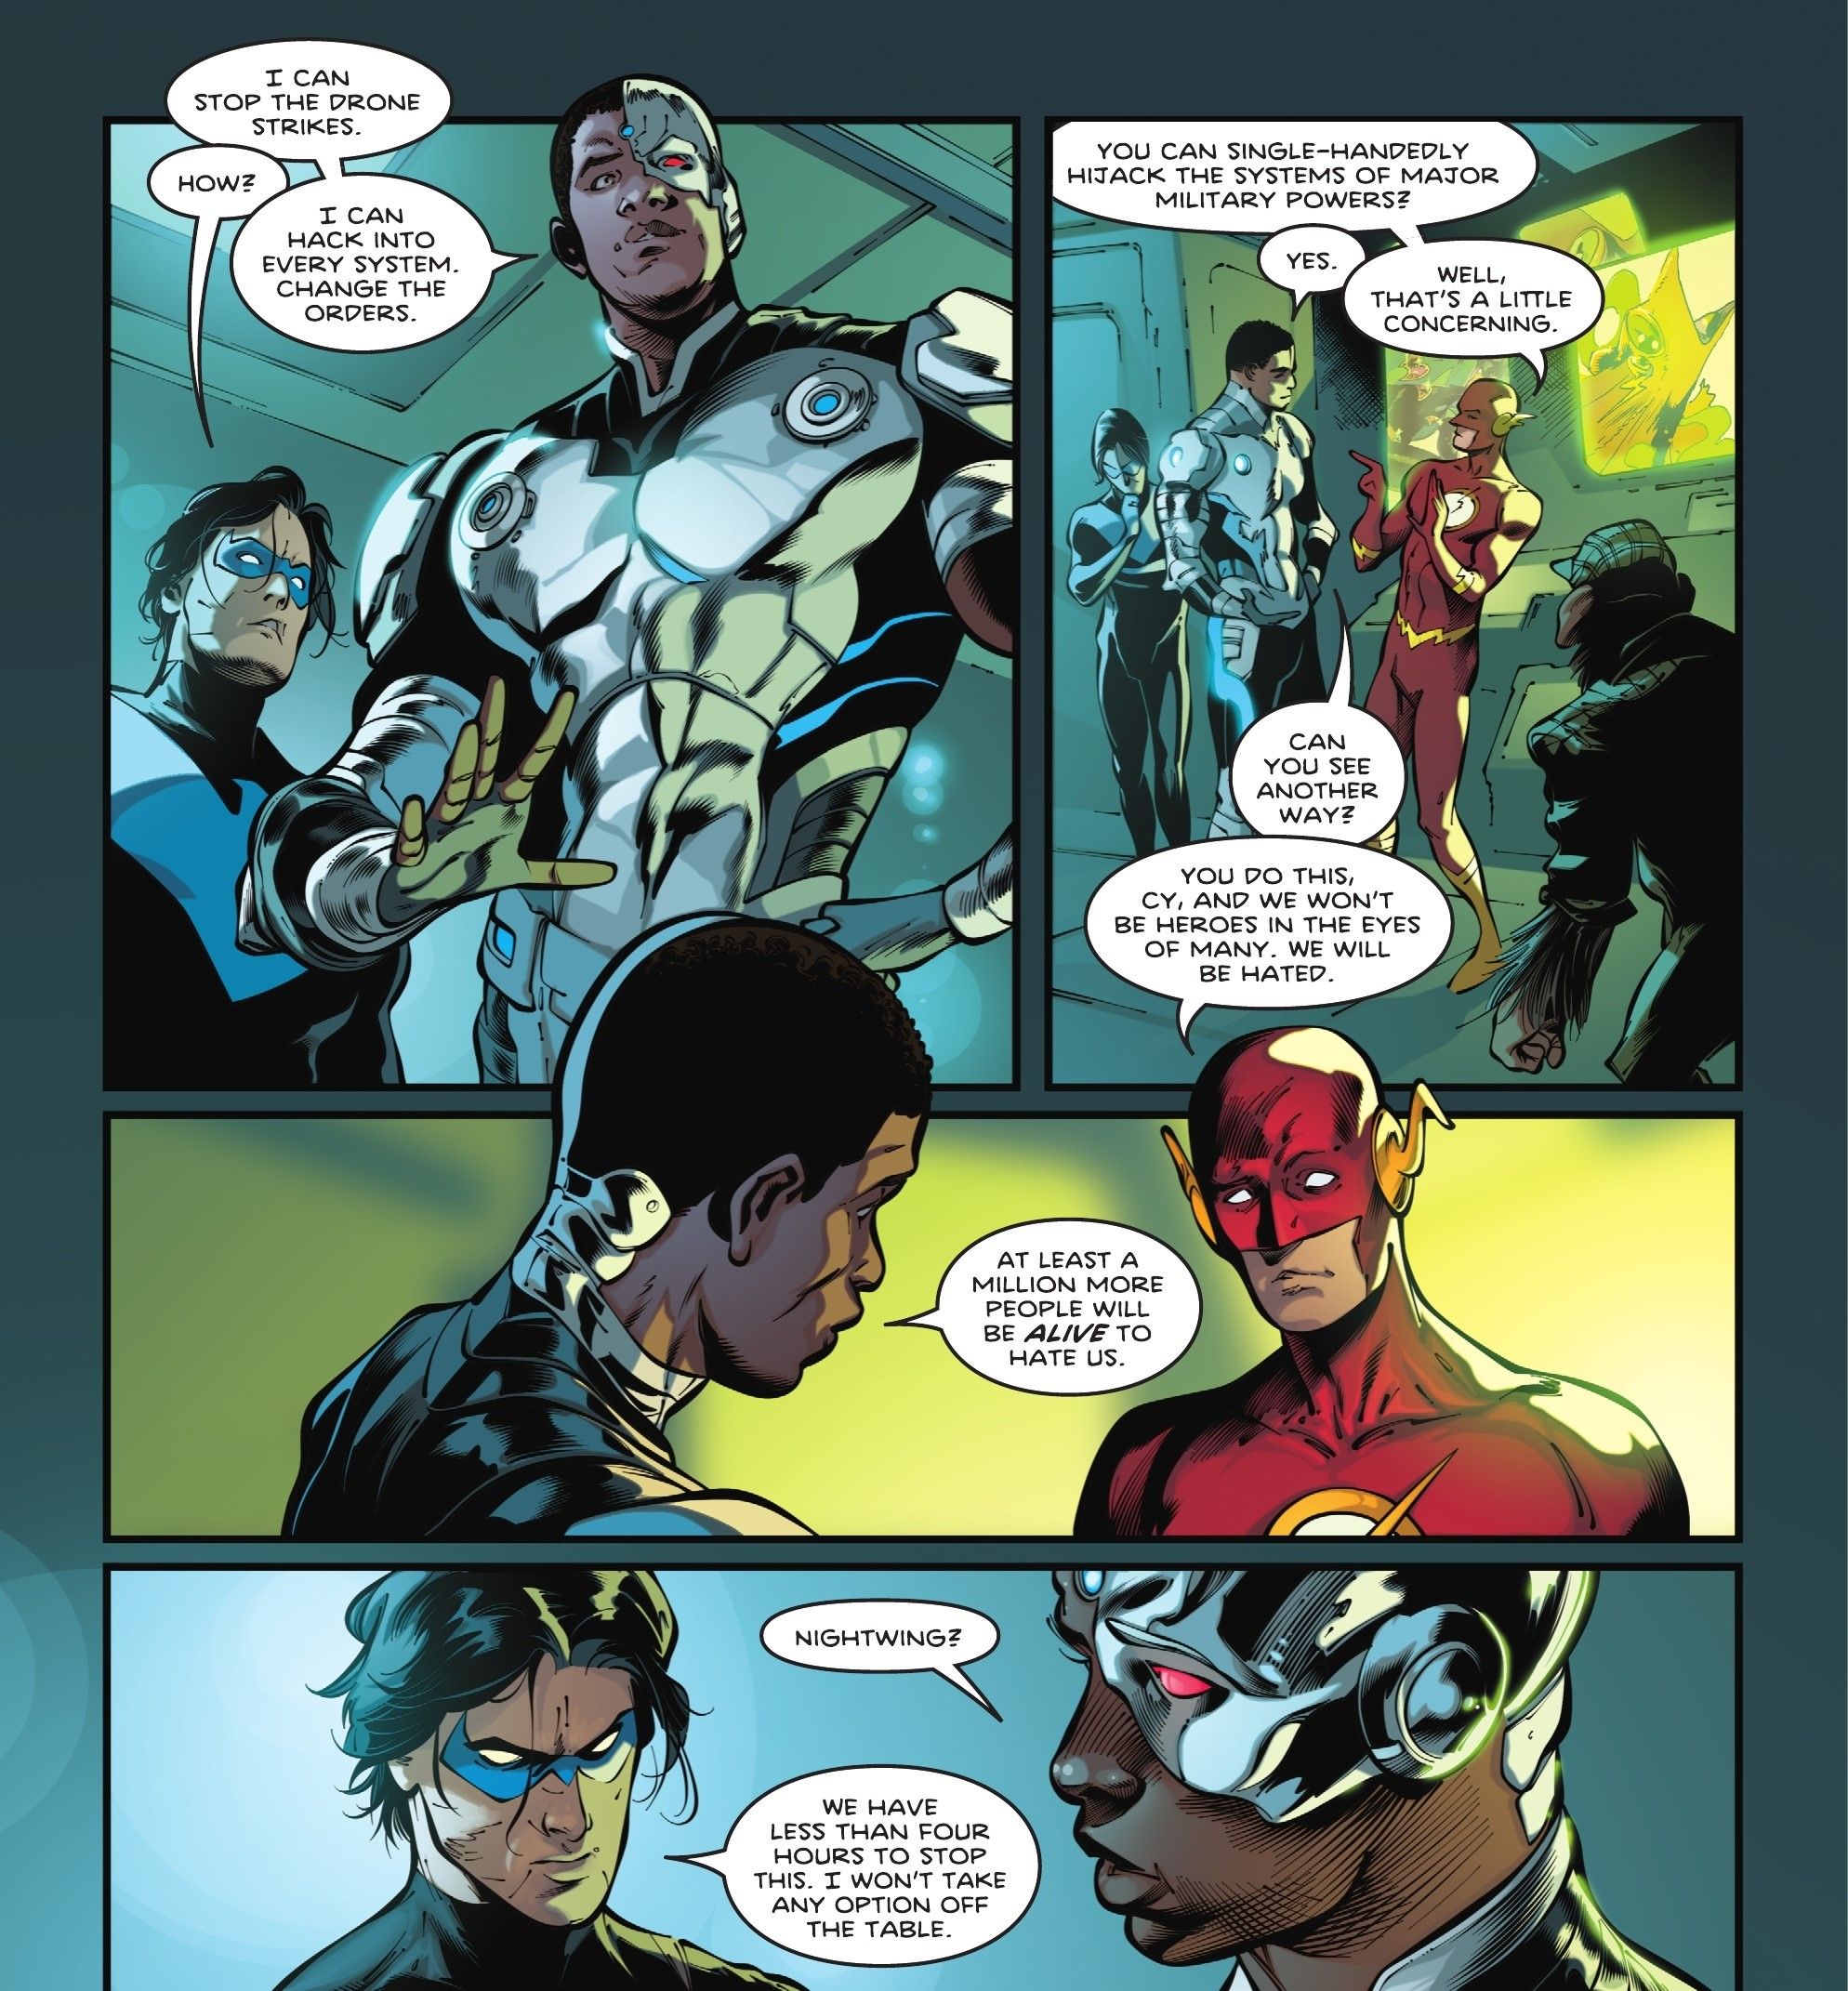 “You Do This, And We Won’t Be Heroes”: Nightwing Just Made a Decision That Could End The Titans (& Maybe Should)